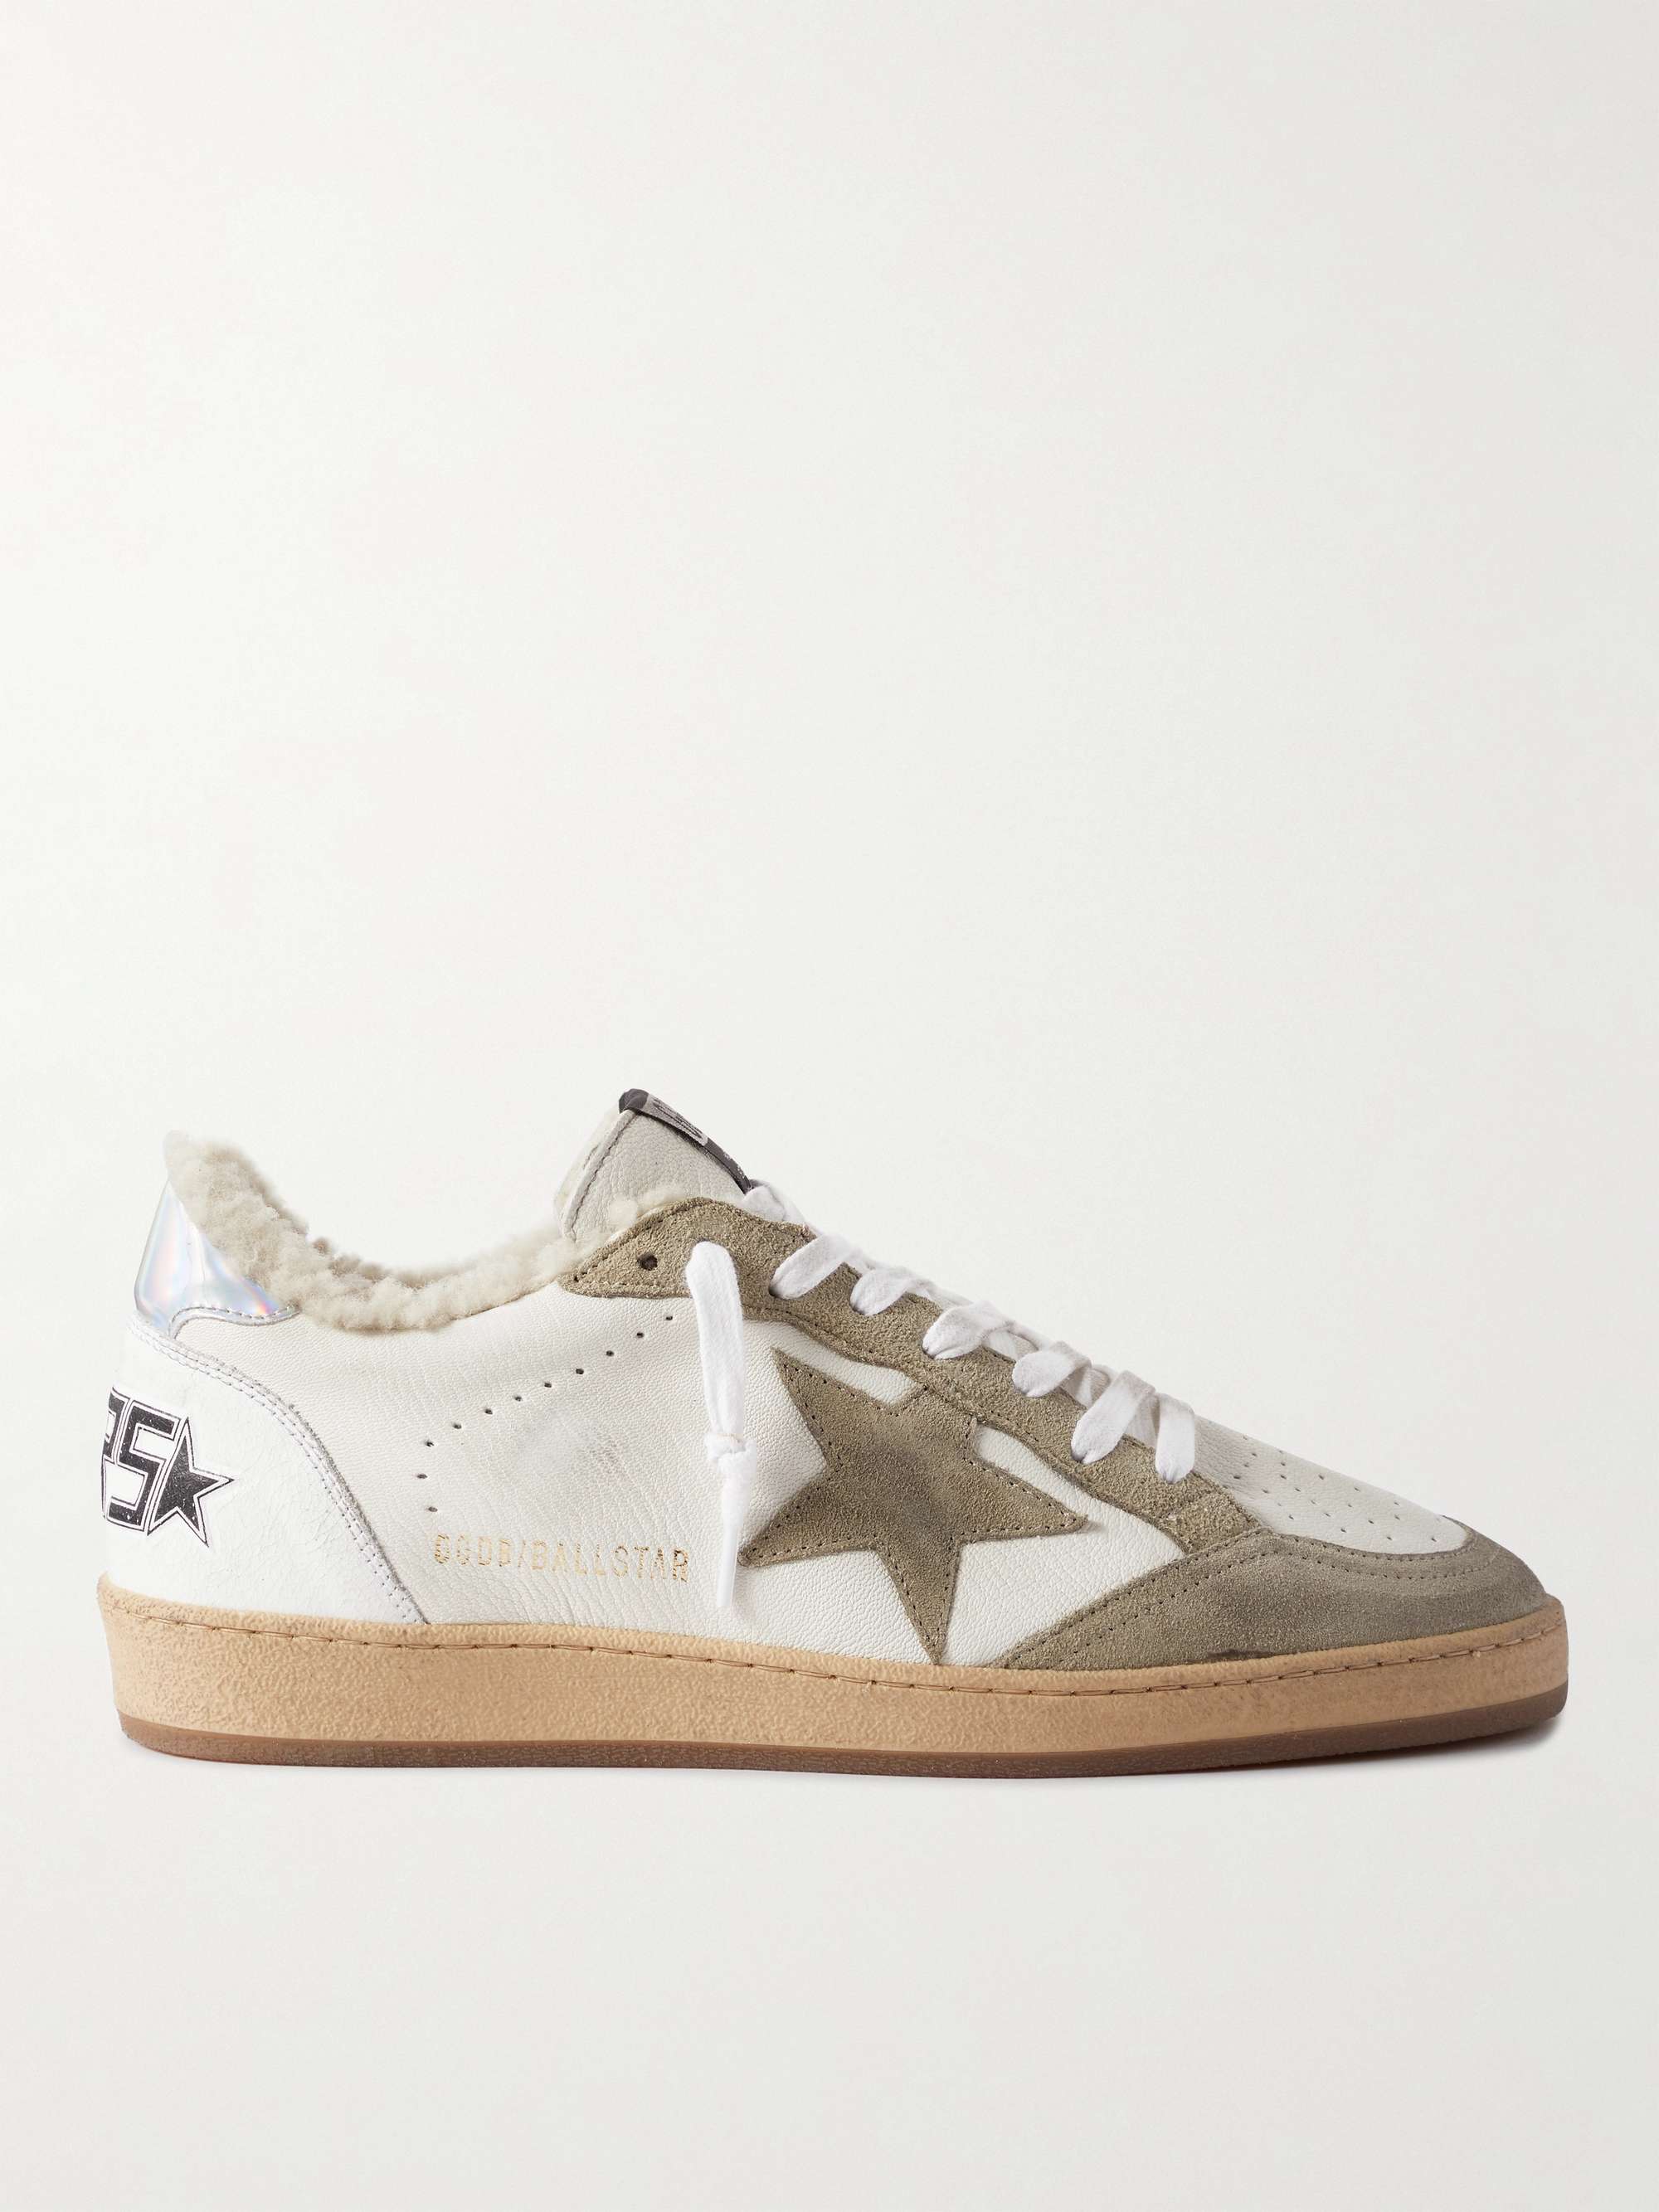 White Ball Star Shearling-Lined Distressed Leather and Suede Sneakers | GOLDEN  GOOSE | MR PORTER